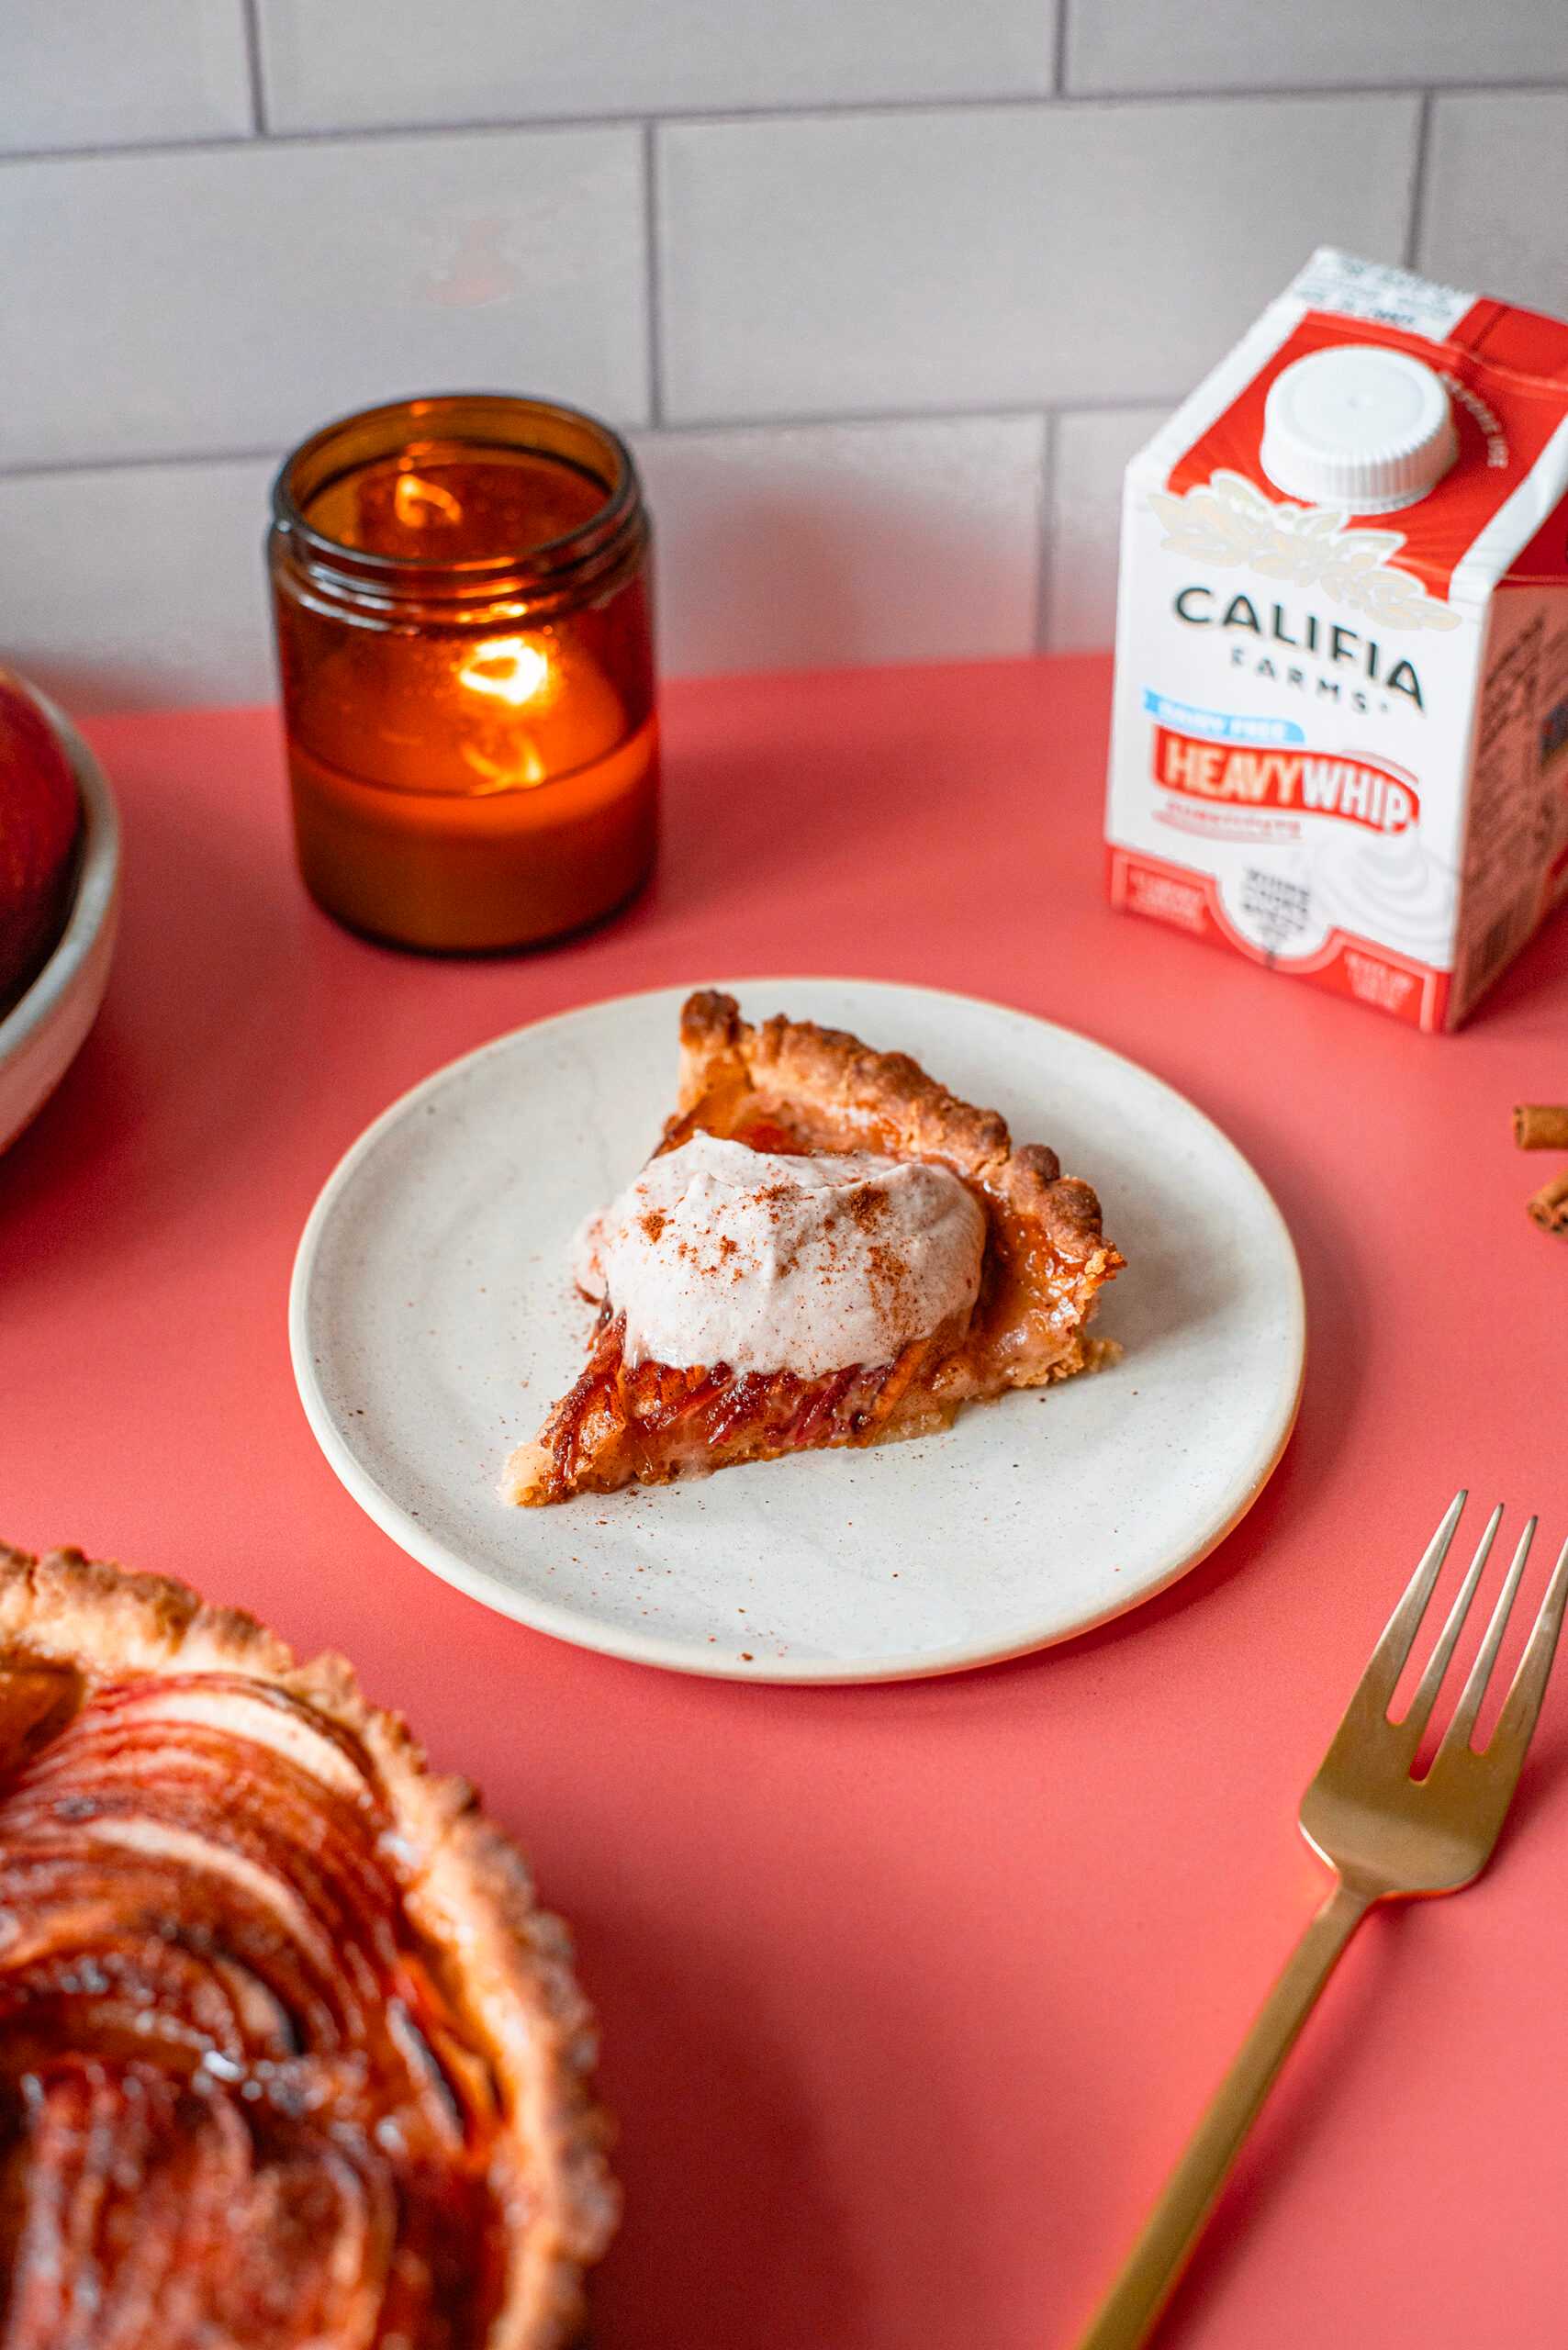 A slice of apple tart sits in the foreground of the image, with Califia Farms Heavy Whip behind.